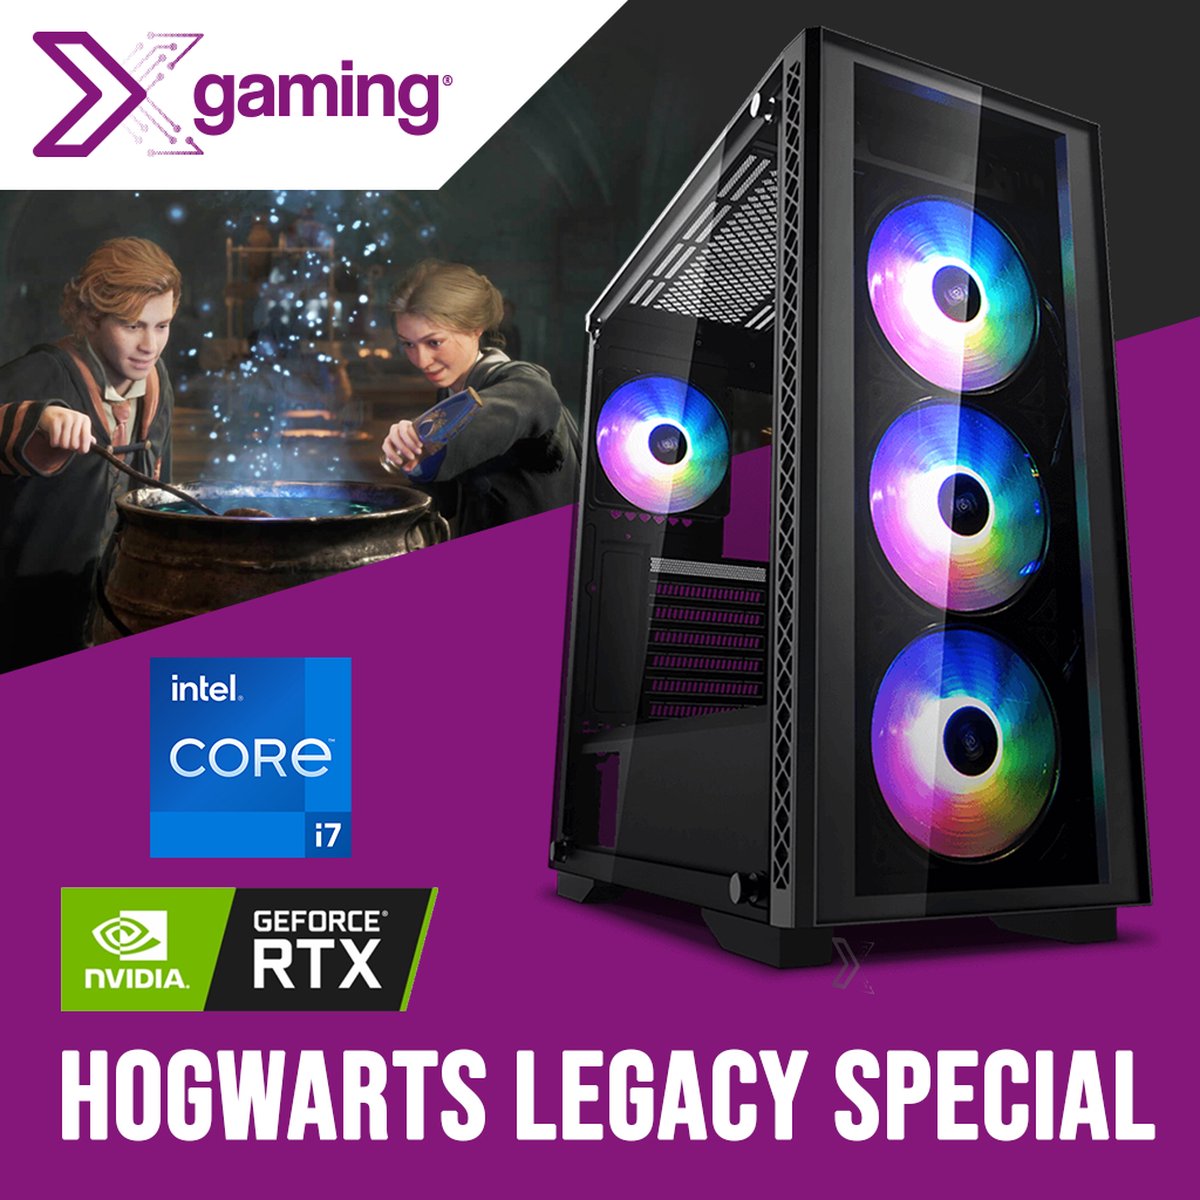 Game PC Hogwarts Legacy Deluxe Special Edition - Intel i7 12700, GeForce RTX 4070 Ti, 16GB, 1TB NVME SSD, WiFi + Bluetooth, Waterkoeling